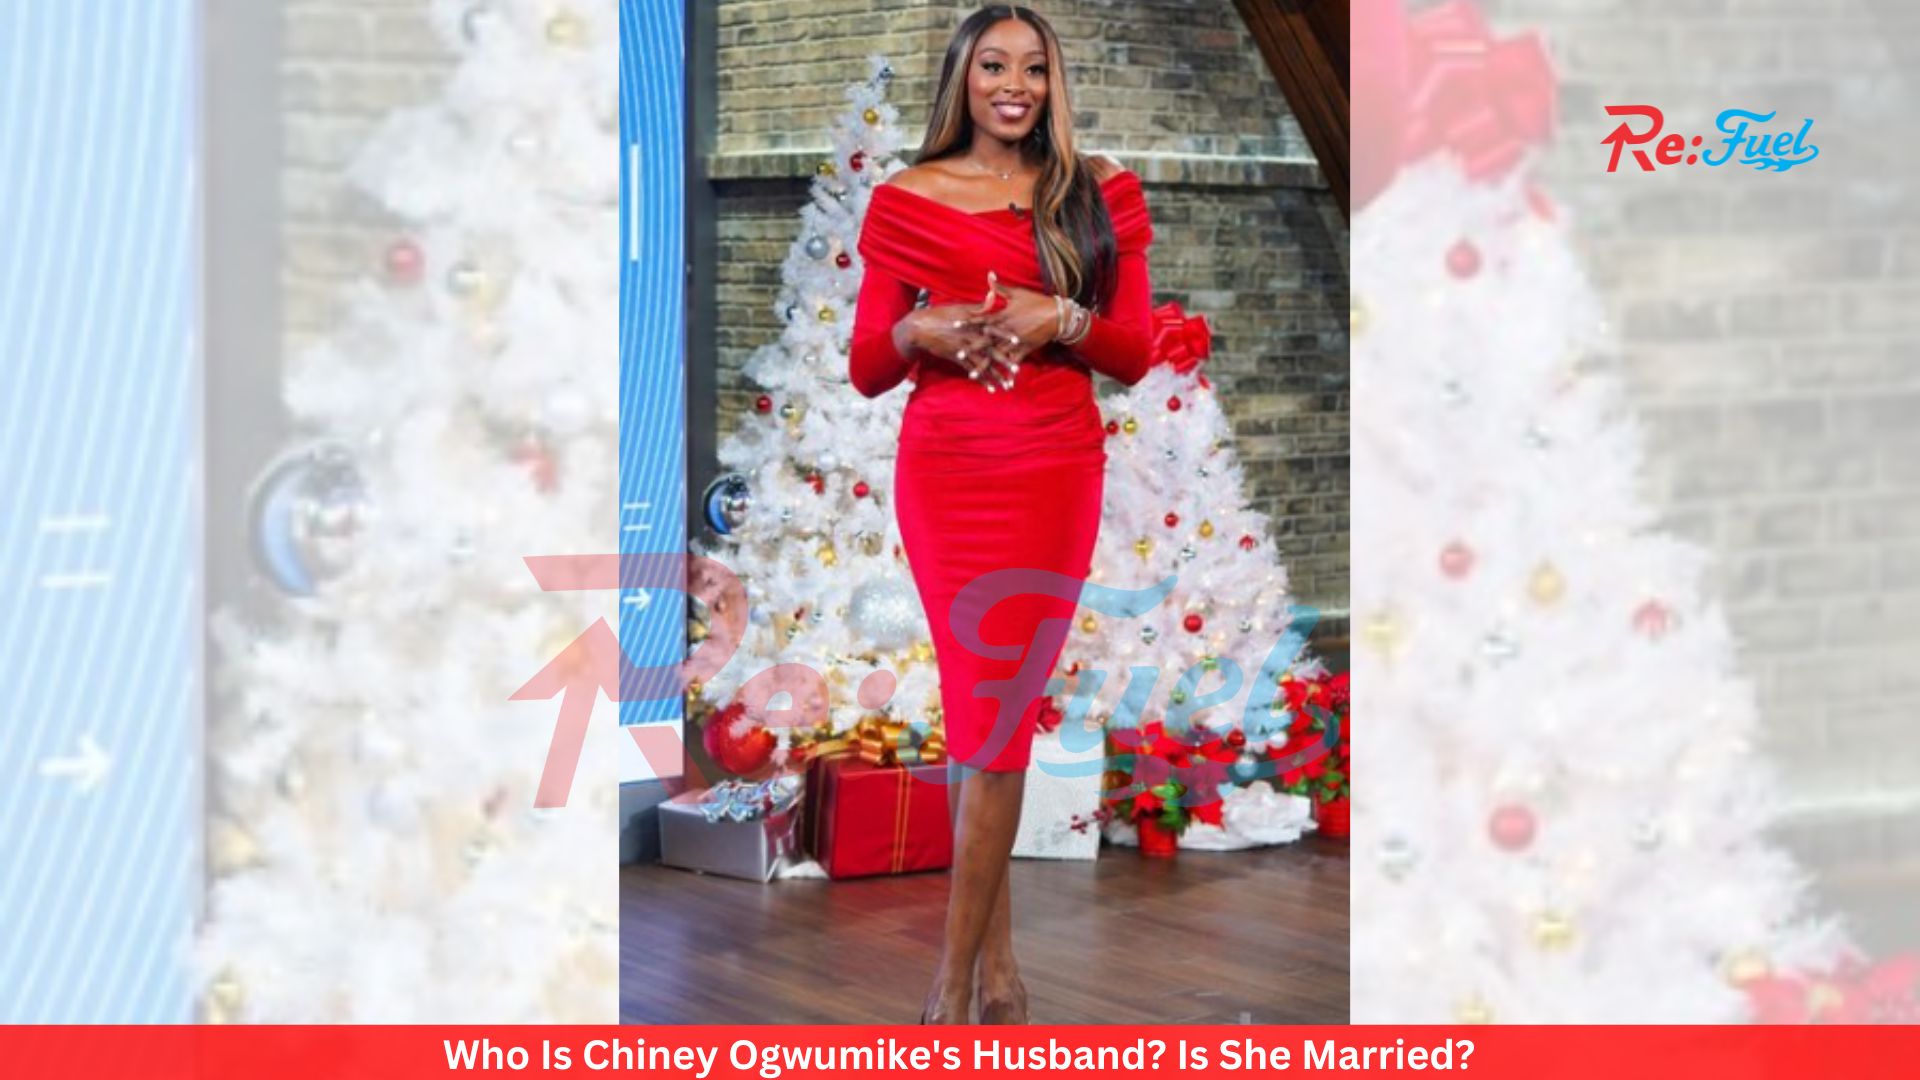 Who Is Chiney Ogwumike's Husband? Is She Married?